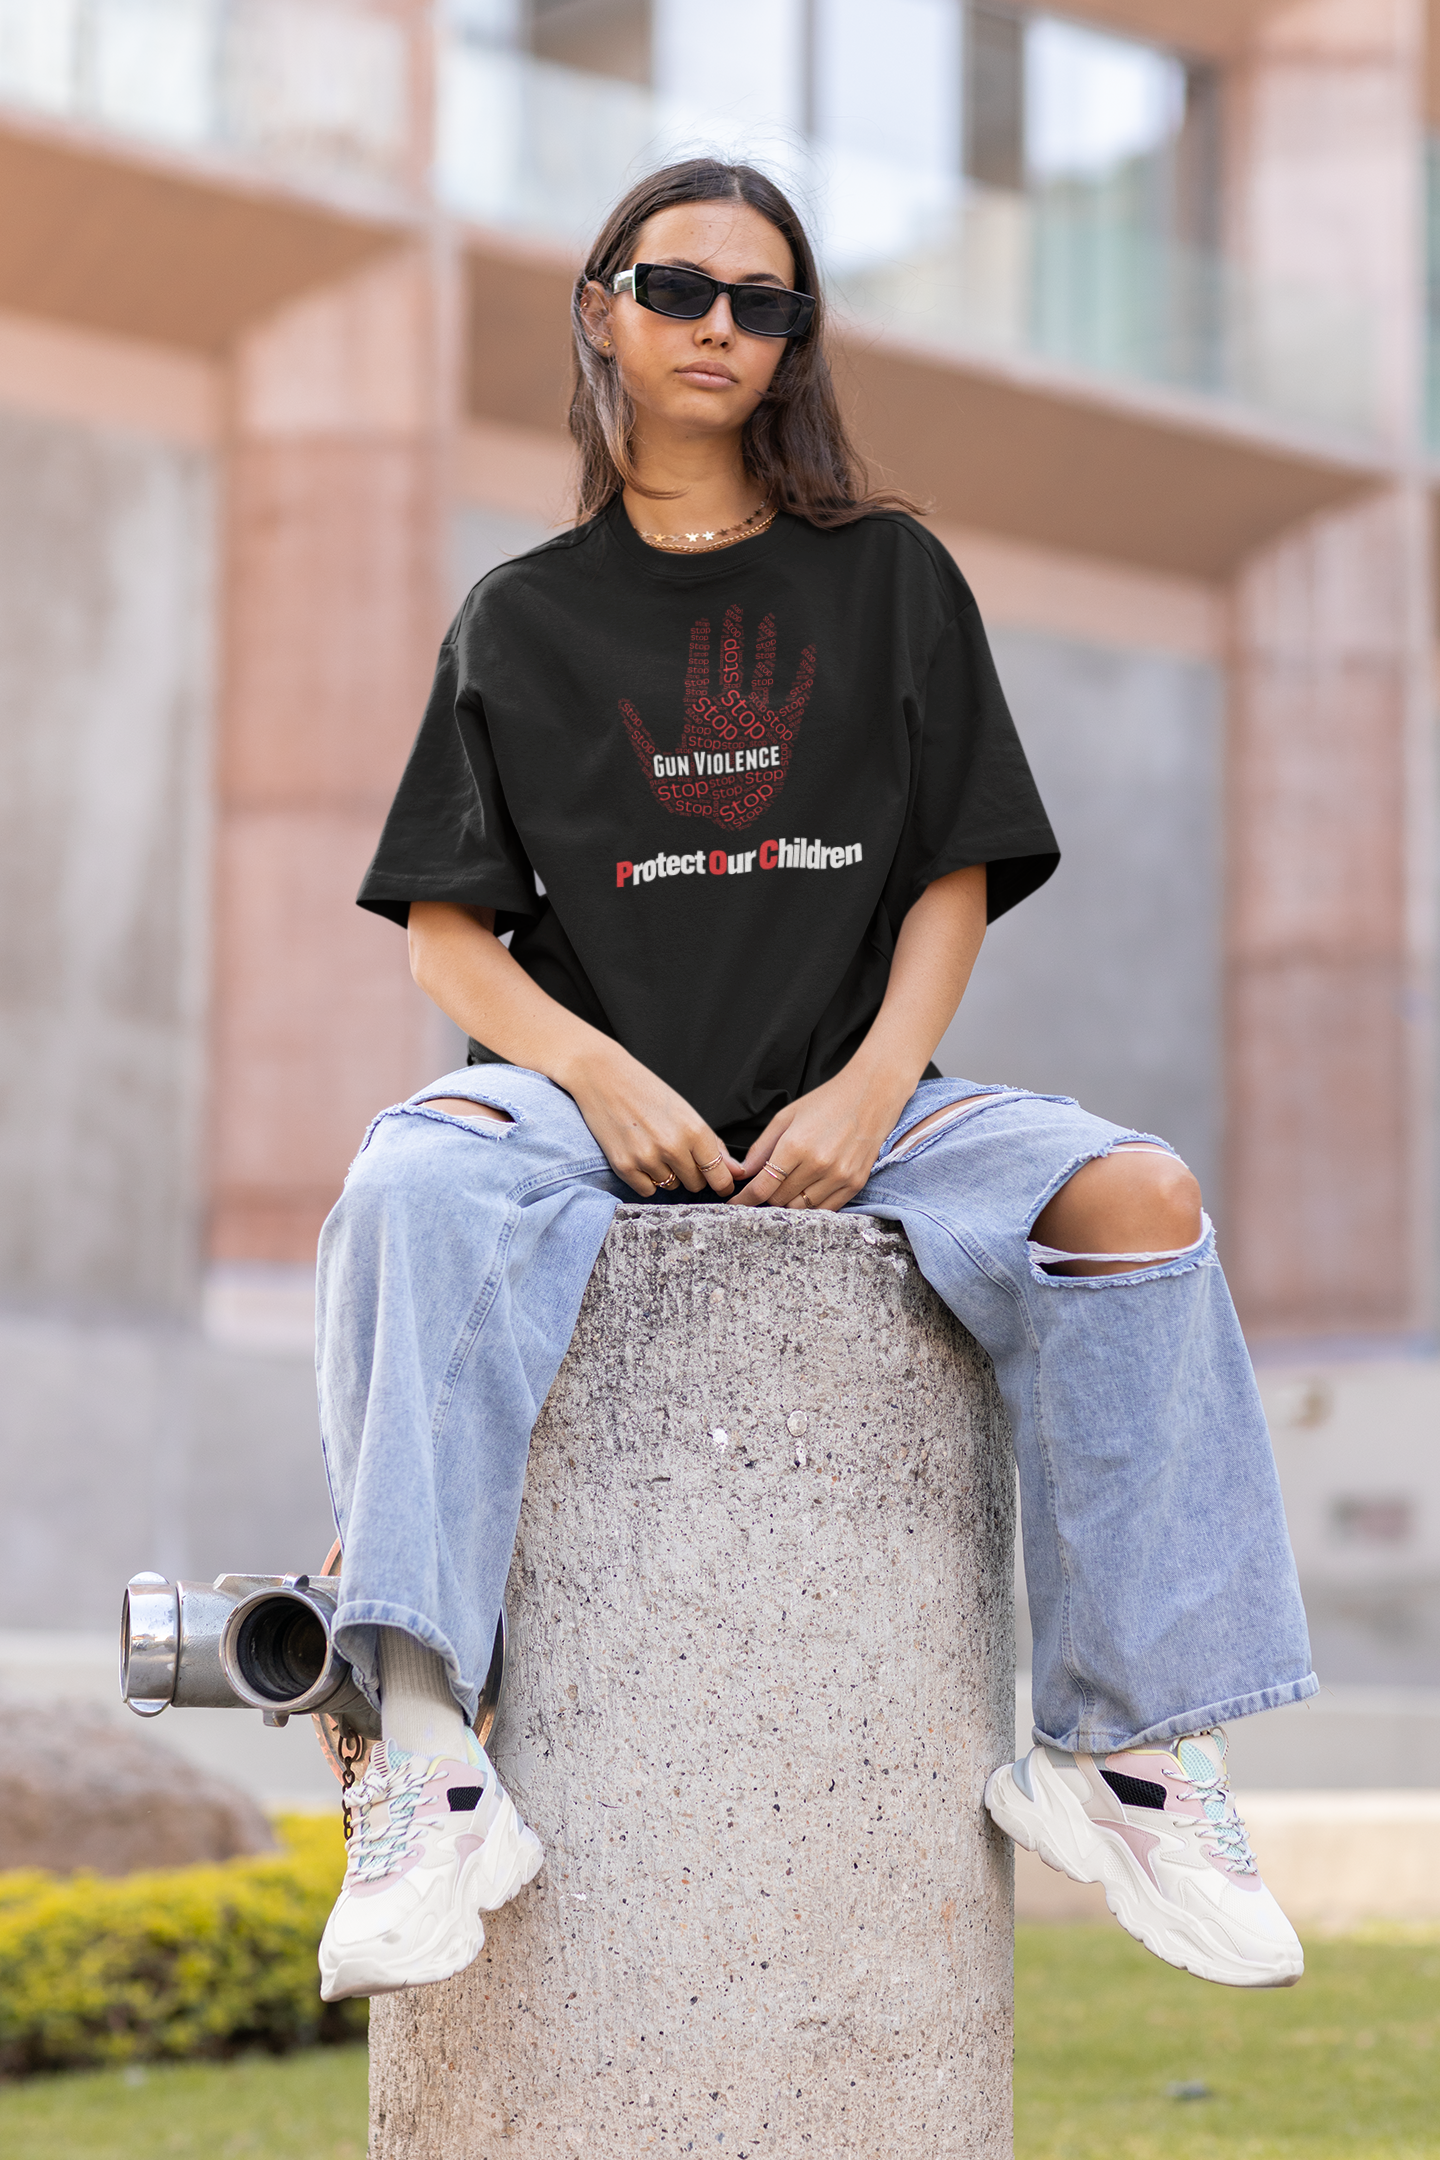 Stop the gun violence and protect our children [Women] Custom Graphic Tee